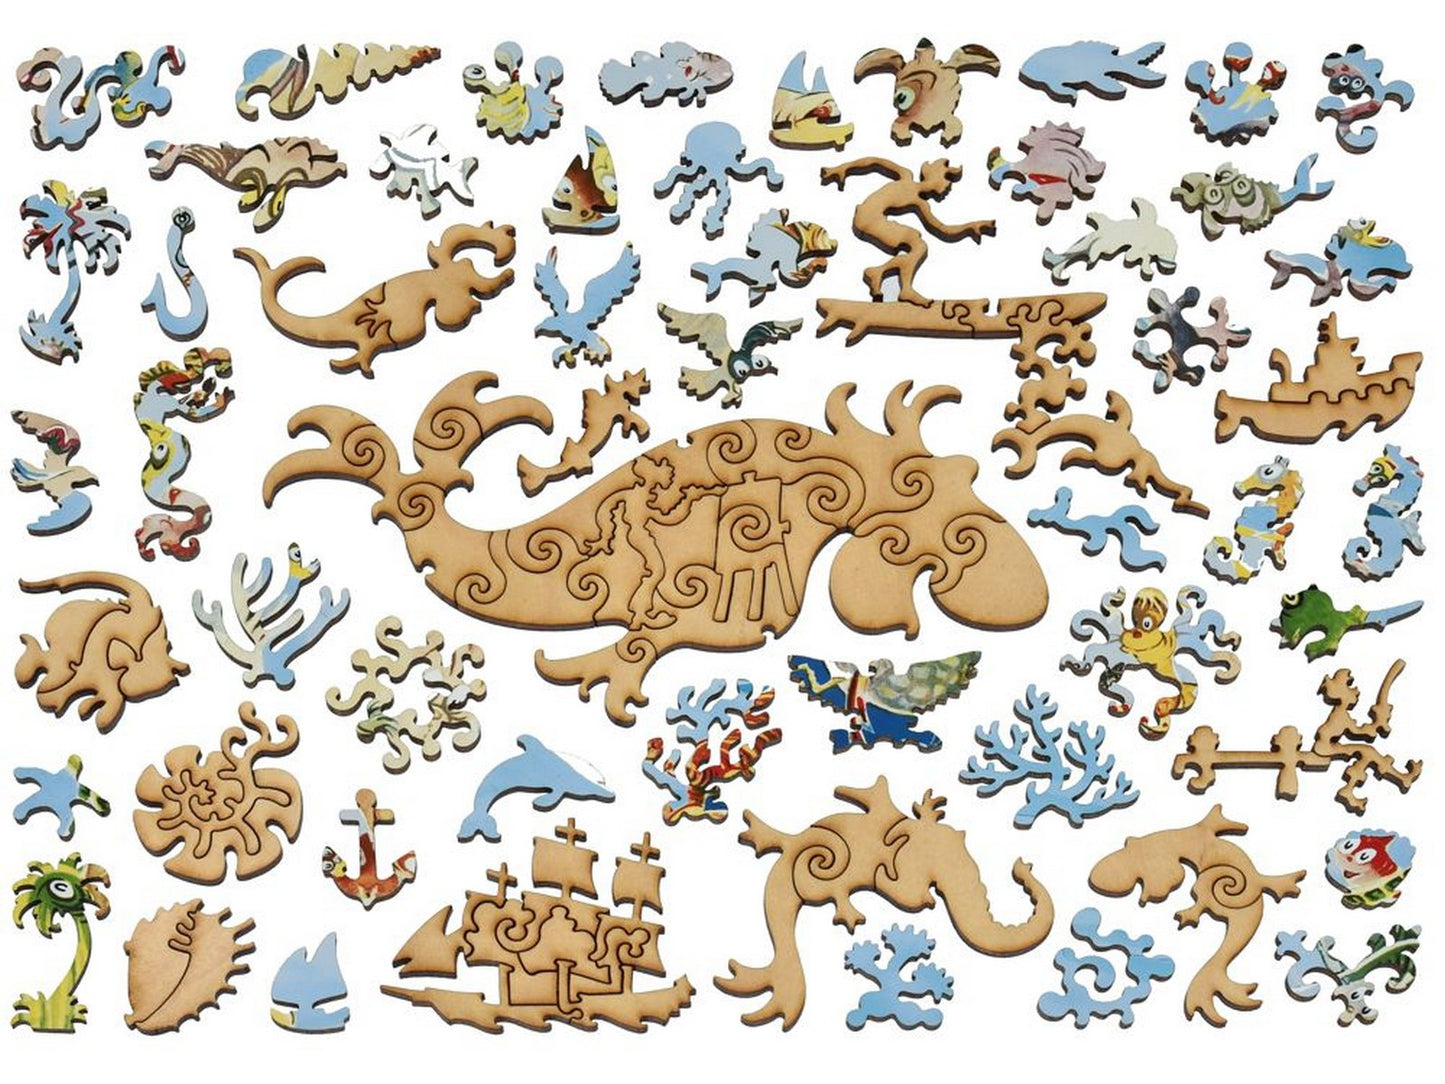 The whimsies that can be found in the puzzle, A Plethora of Fish.